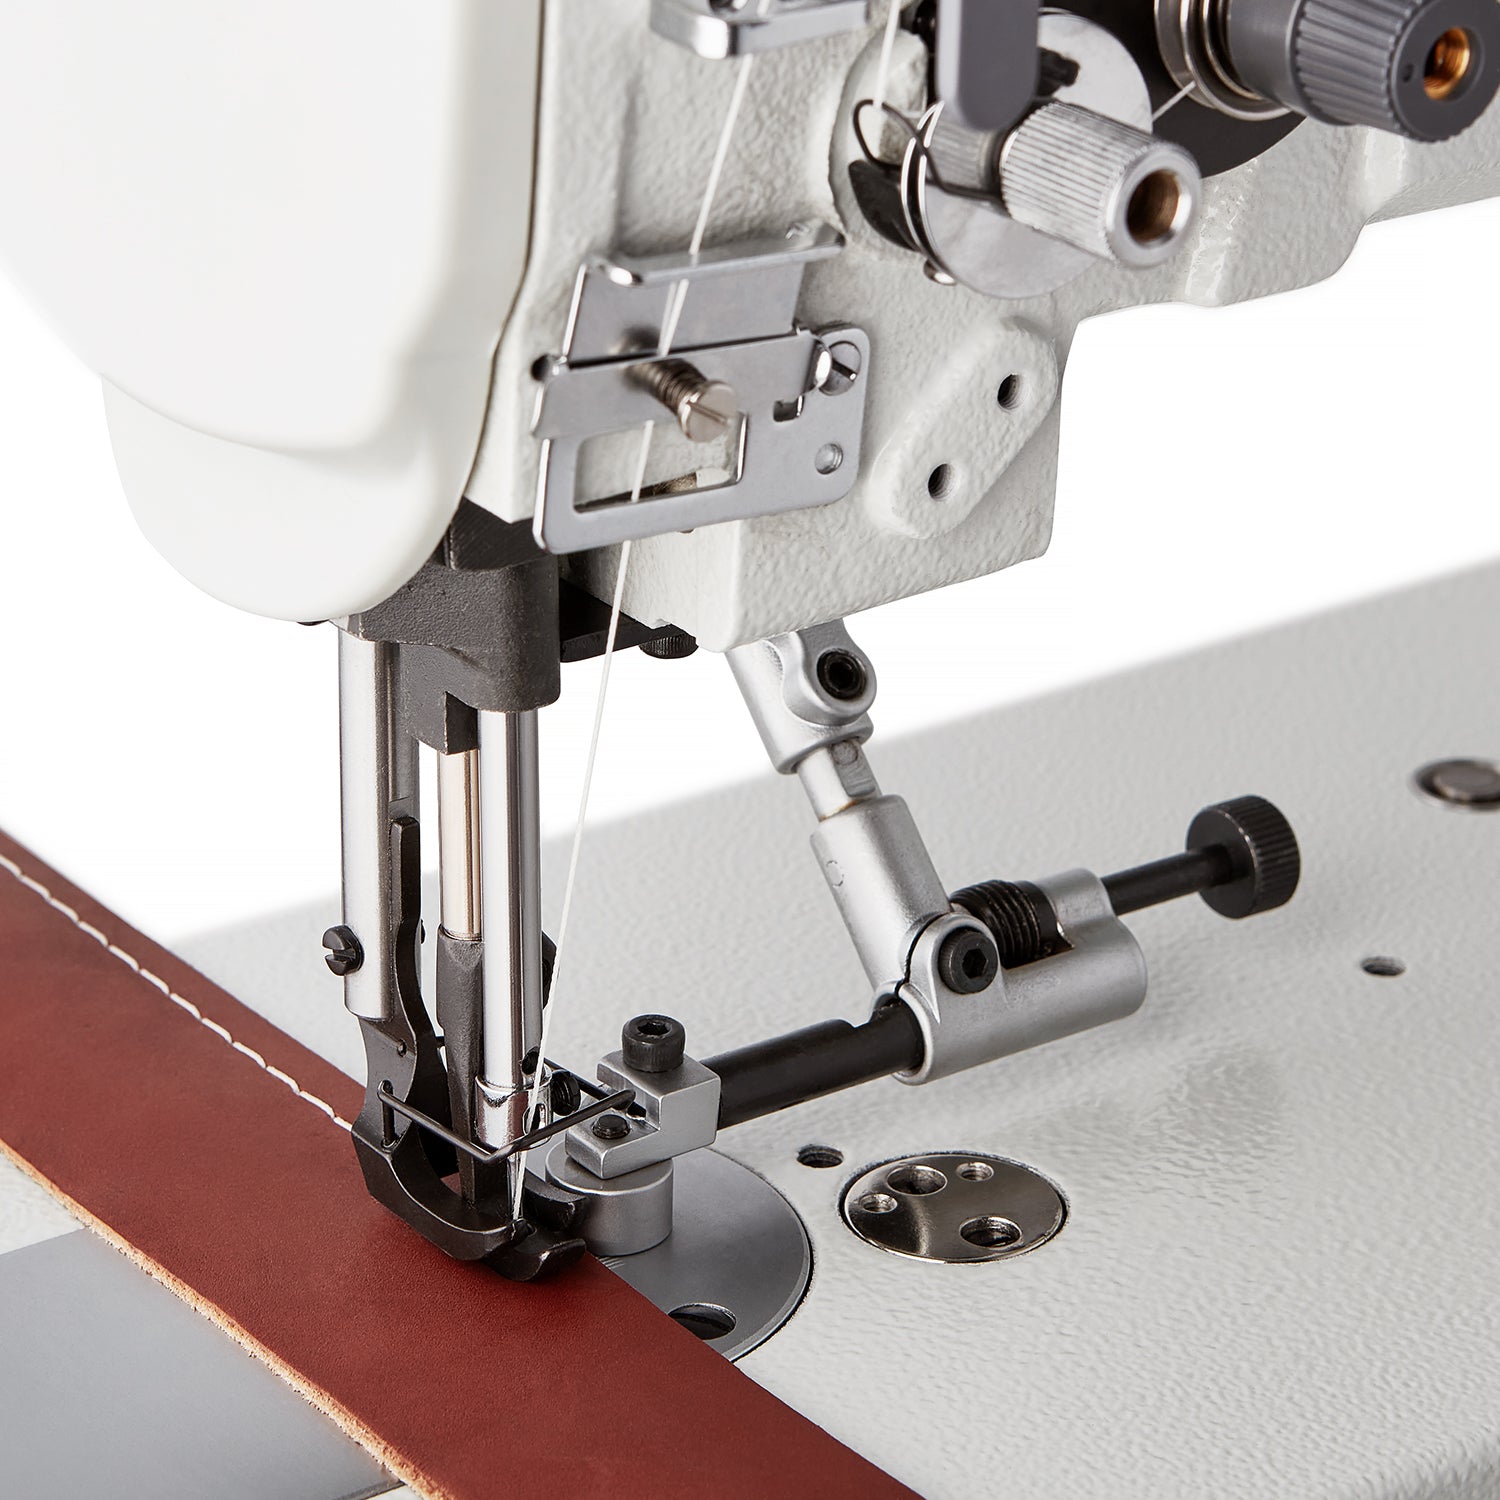 Lockstitch Walking Foot Sewing Machine with Direct Drive, Index Stitching  and Foot Height Adjuster